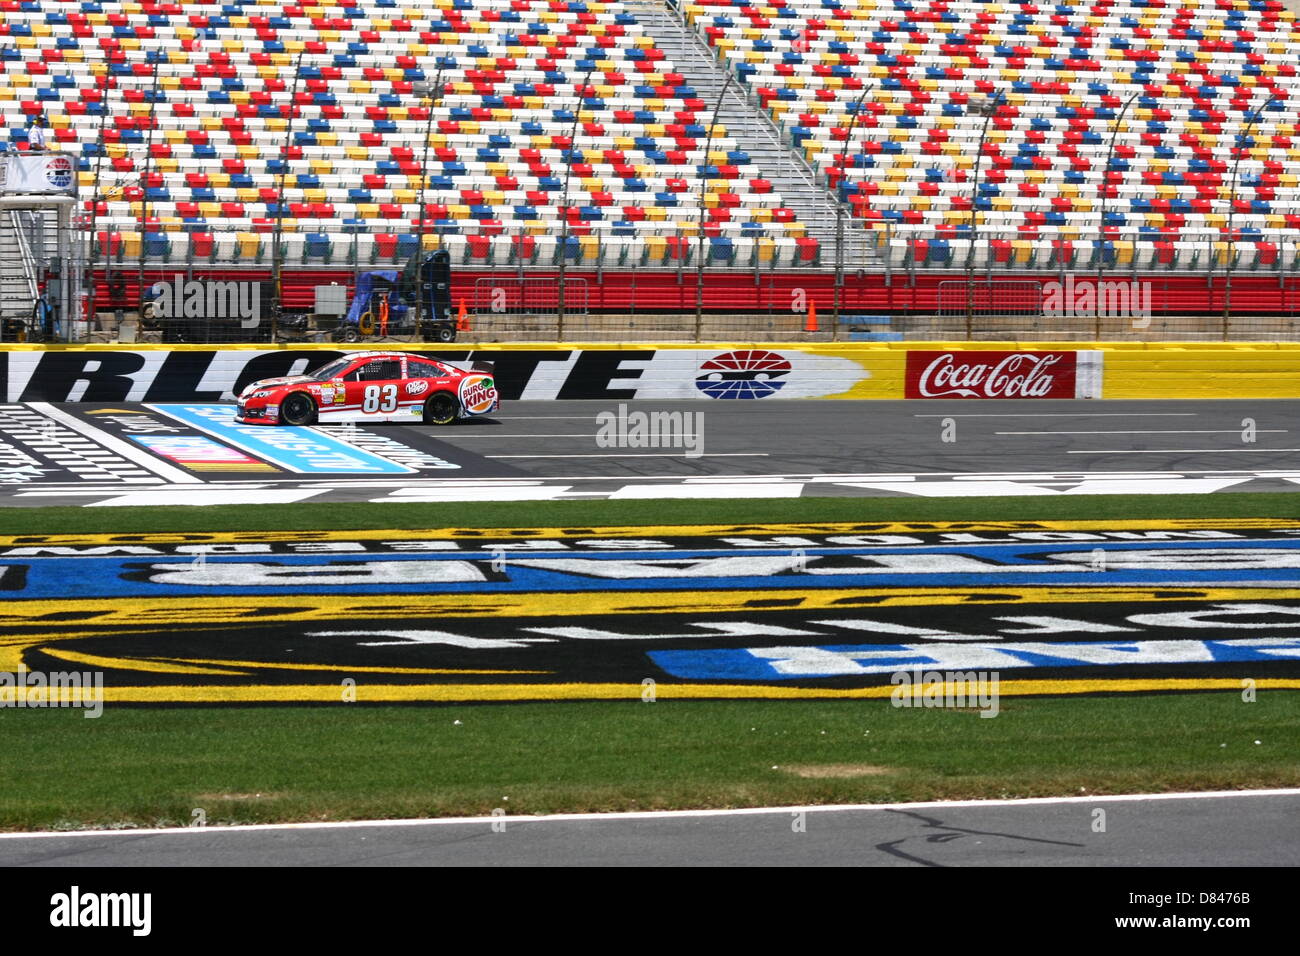 Charlotte, USA. 17th May, 2013. David Reutimann passes the grandstand during final practice for the Sprint Showdown at Charlotte Motor Speedway on May 17, 2013. Credit: Alamy Live News Stock Photo